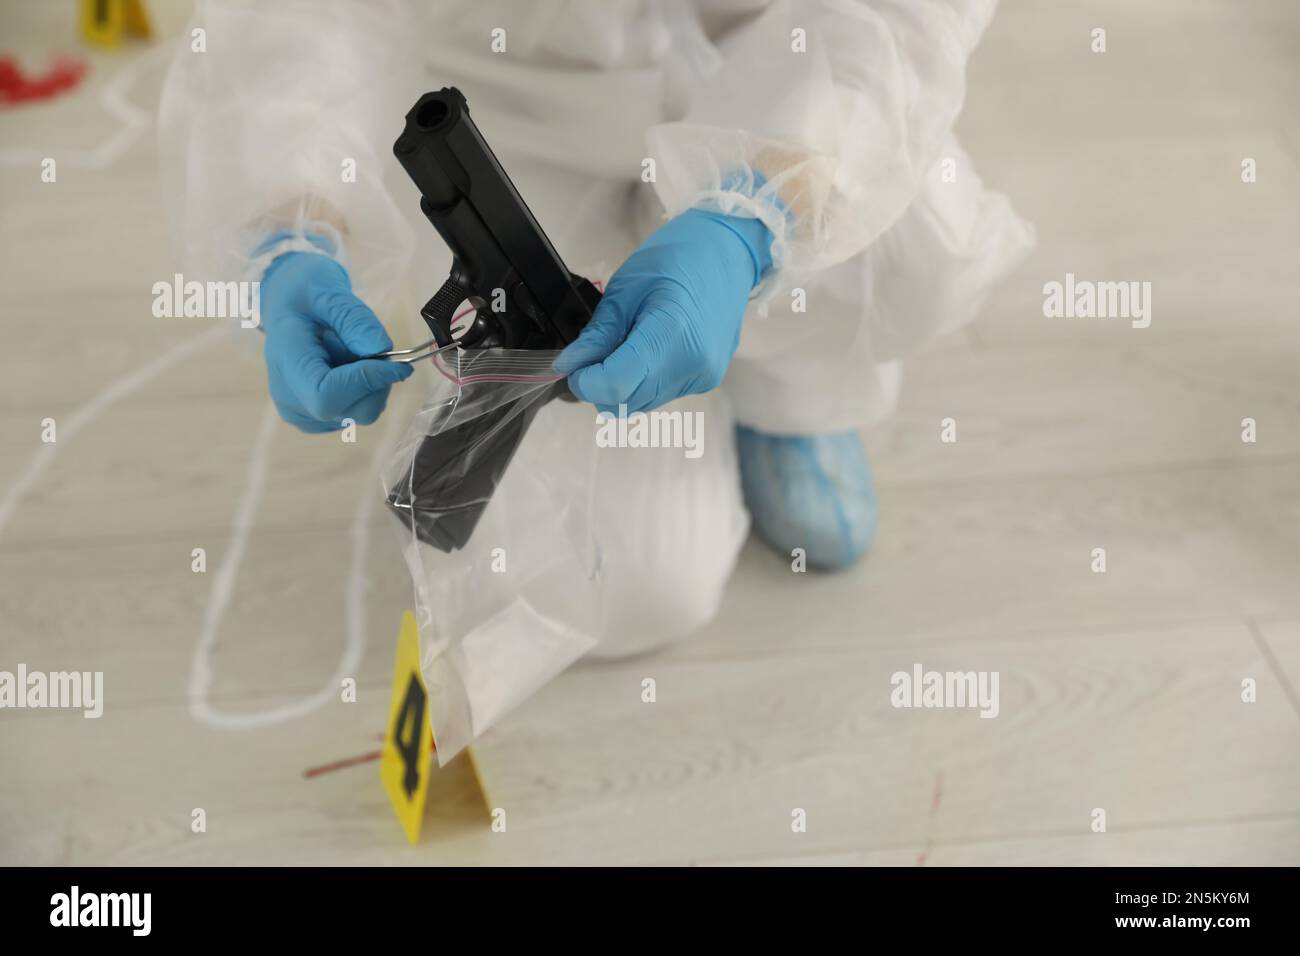 Investigator in protective suit working at crime scene indoors, closeup Stock Photo